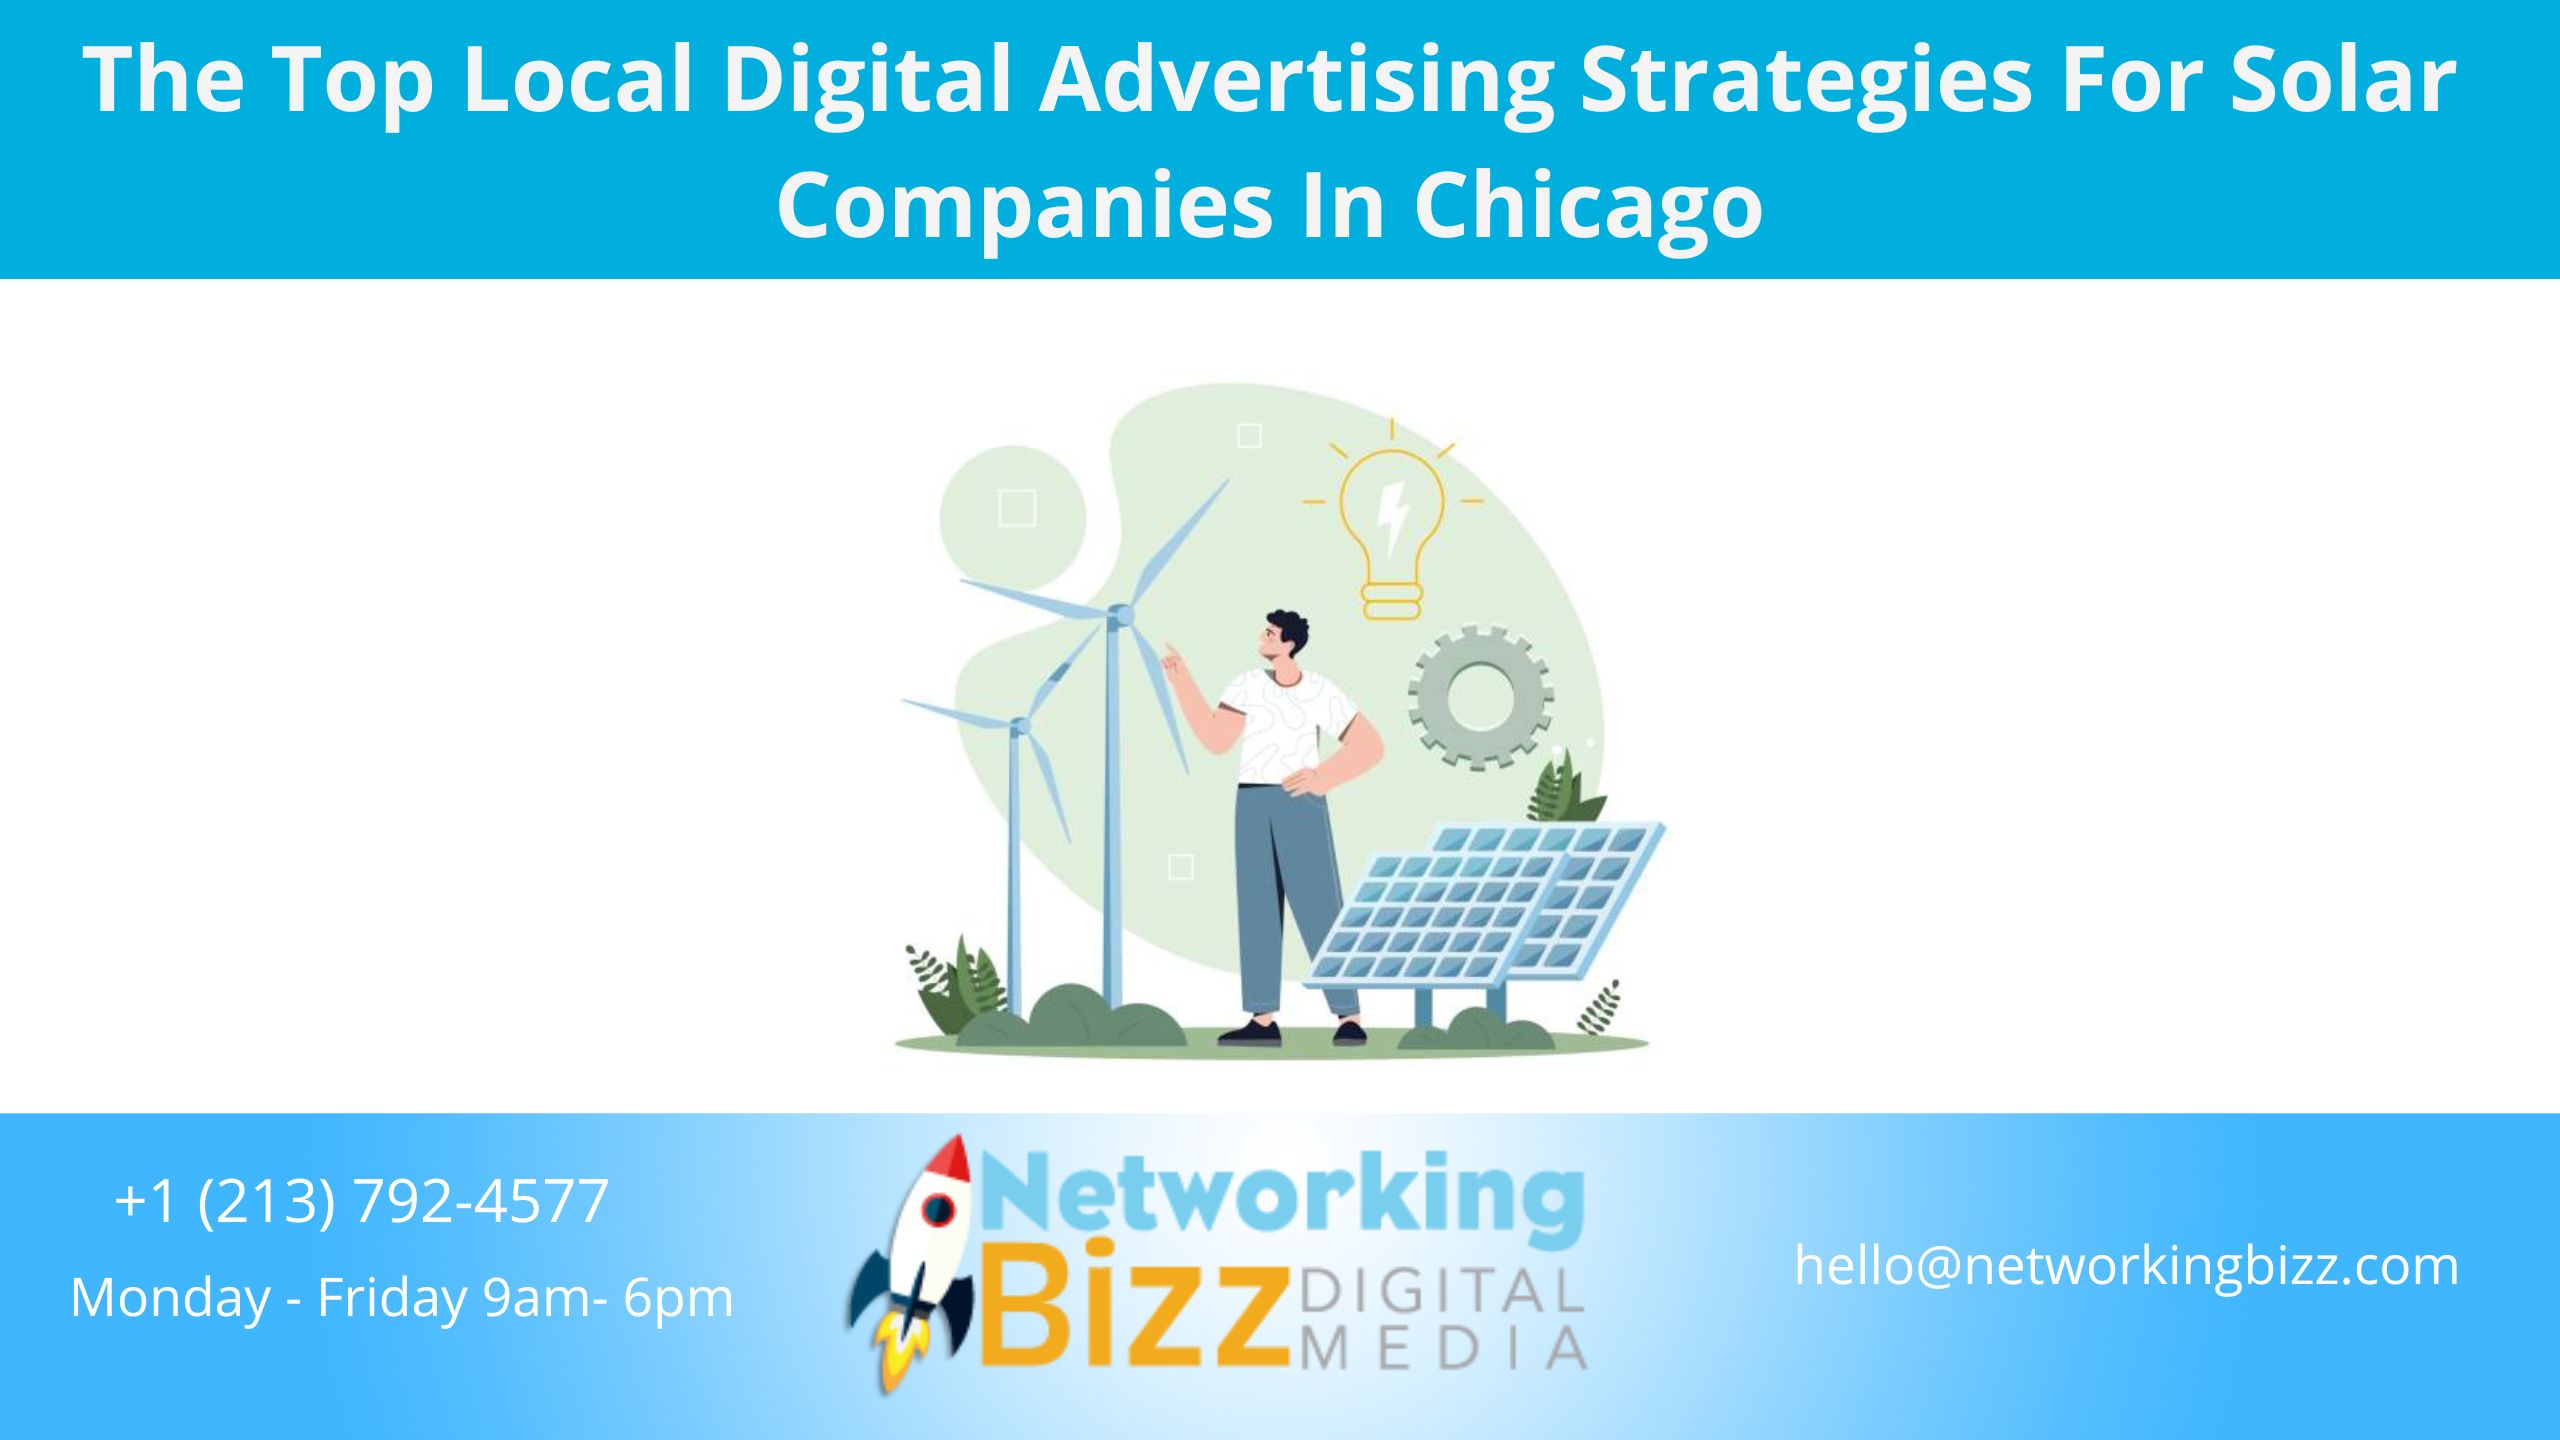 The Top Local Digital Advertising Strategies For Solar Companies In Chicago